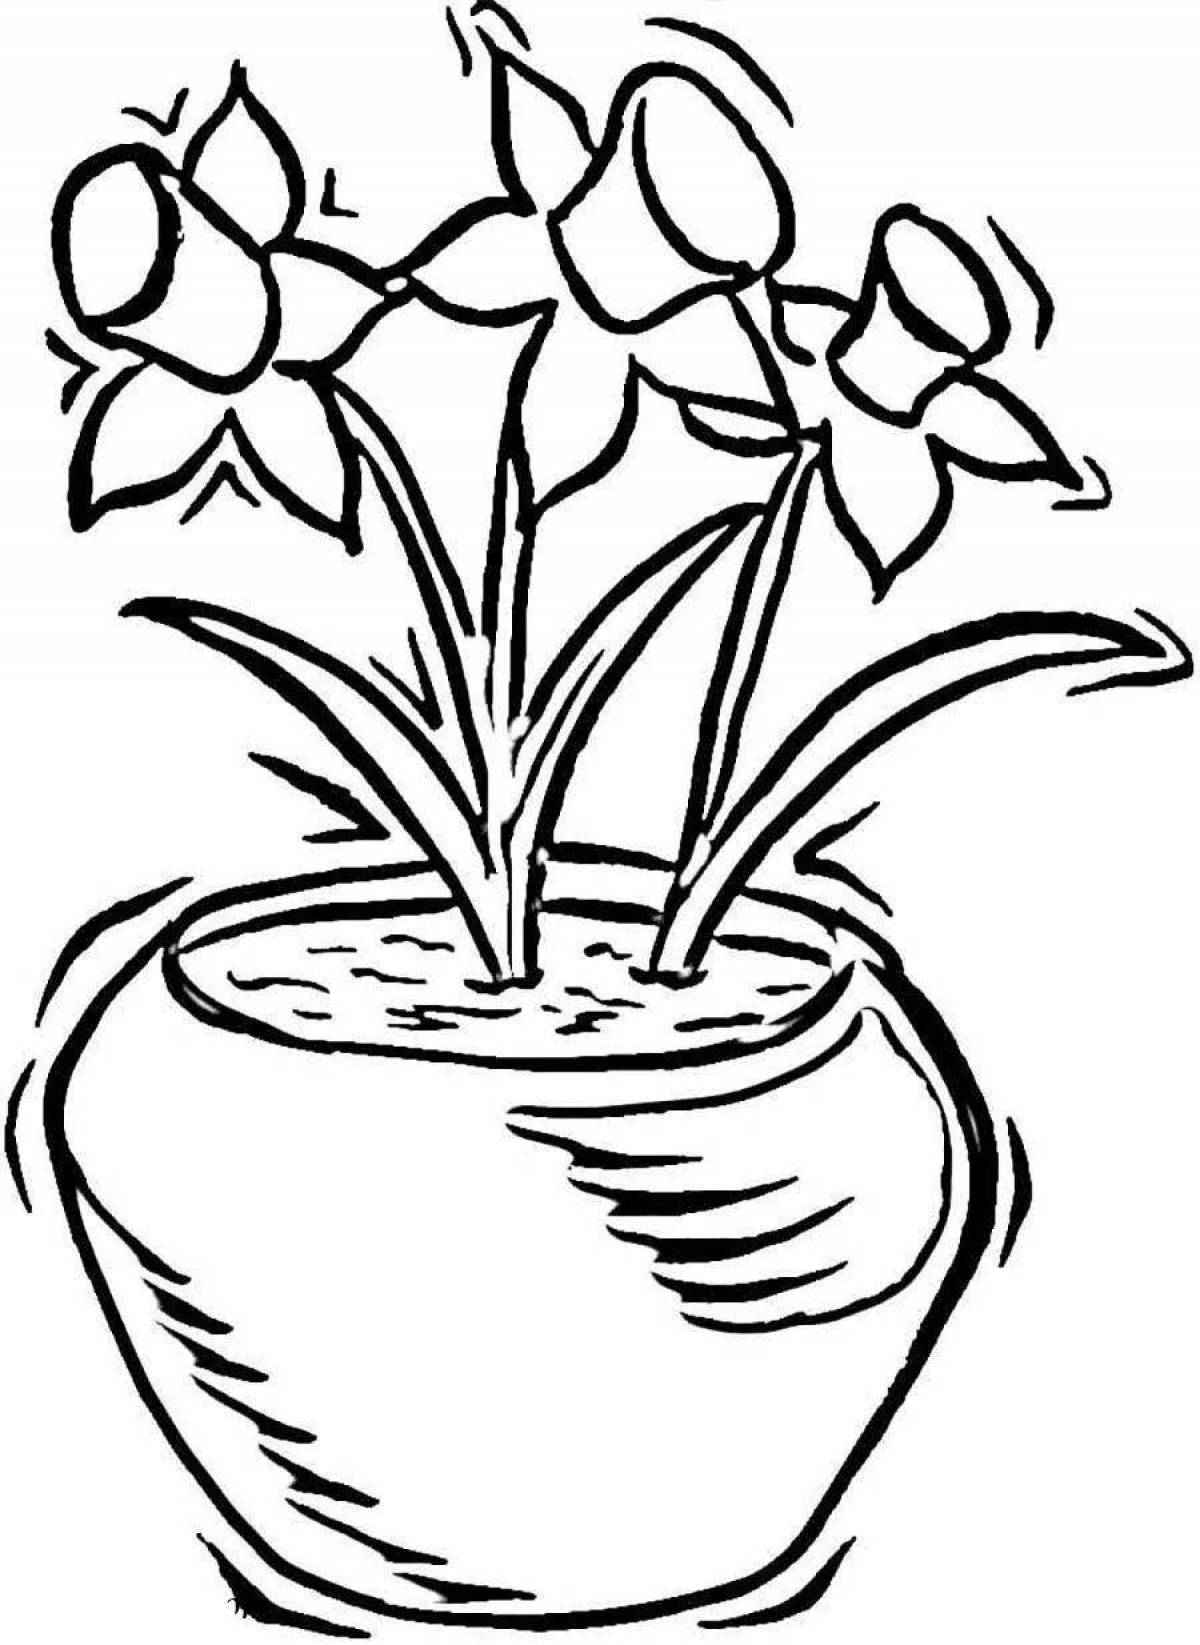 Coloring page happy flower pot